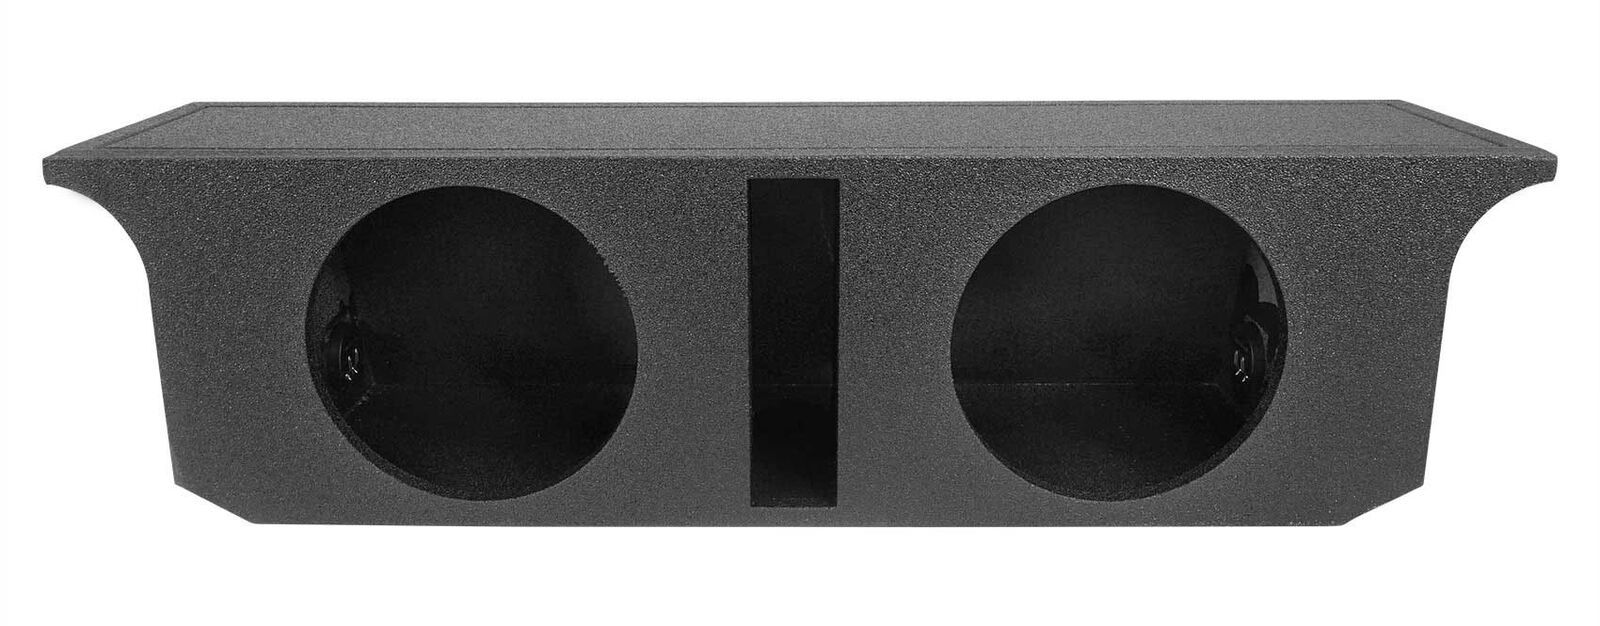 Primary image for Rockville (2) 12" Subwoofer Sub Enclosure Box For 2007-2016 Jeep Wrangler 4-Door